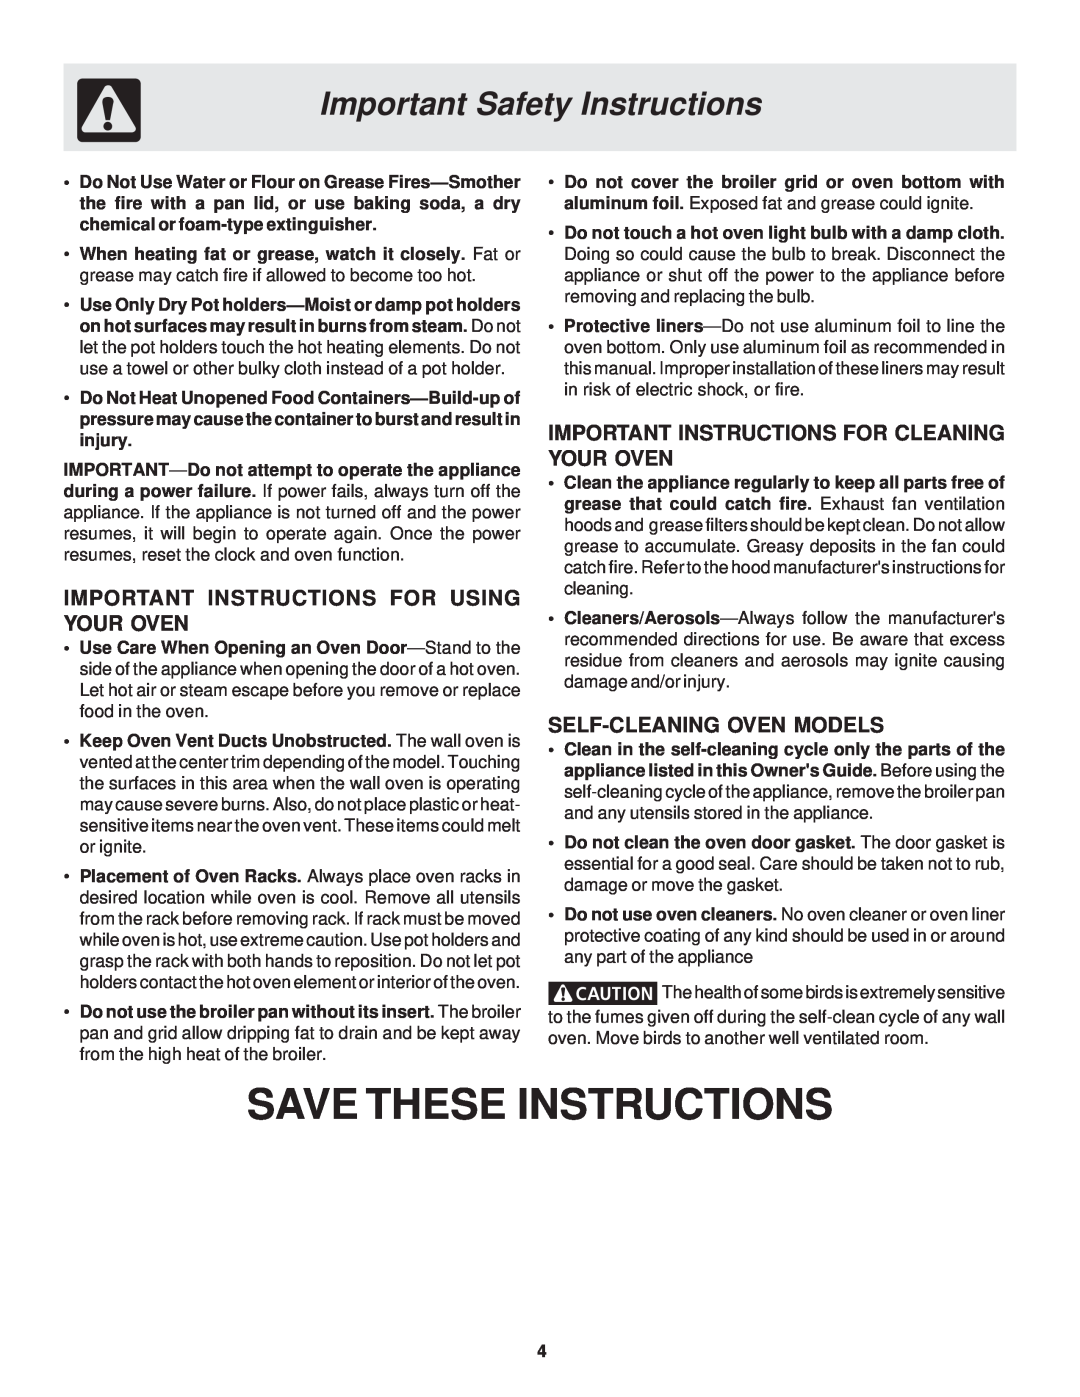 Frigidaire 318200929 Save These Instructions, Important Safety Instructions, Important Instructions For Using Your Oven 